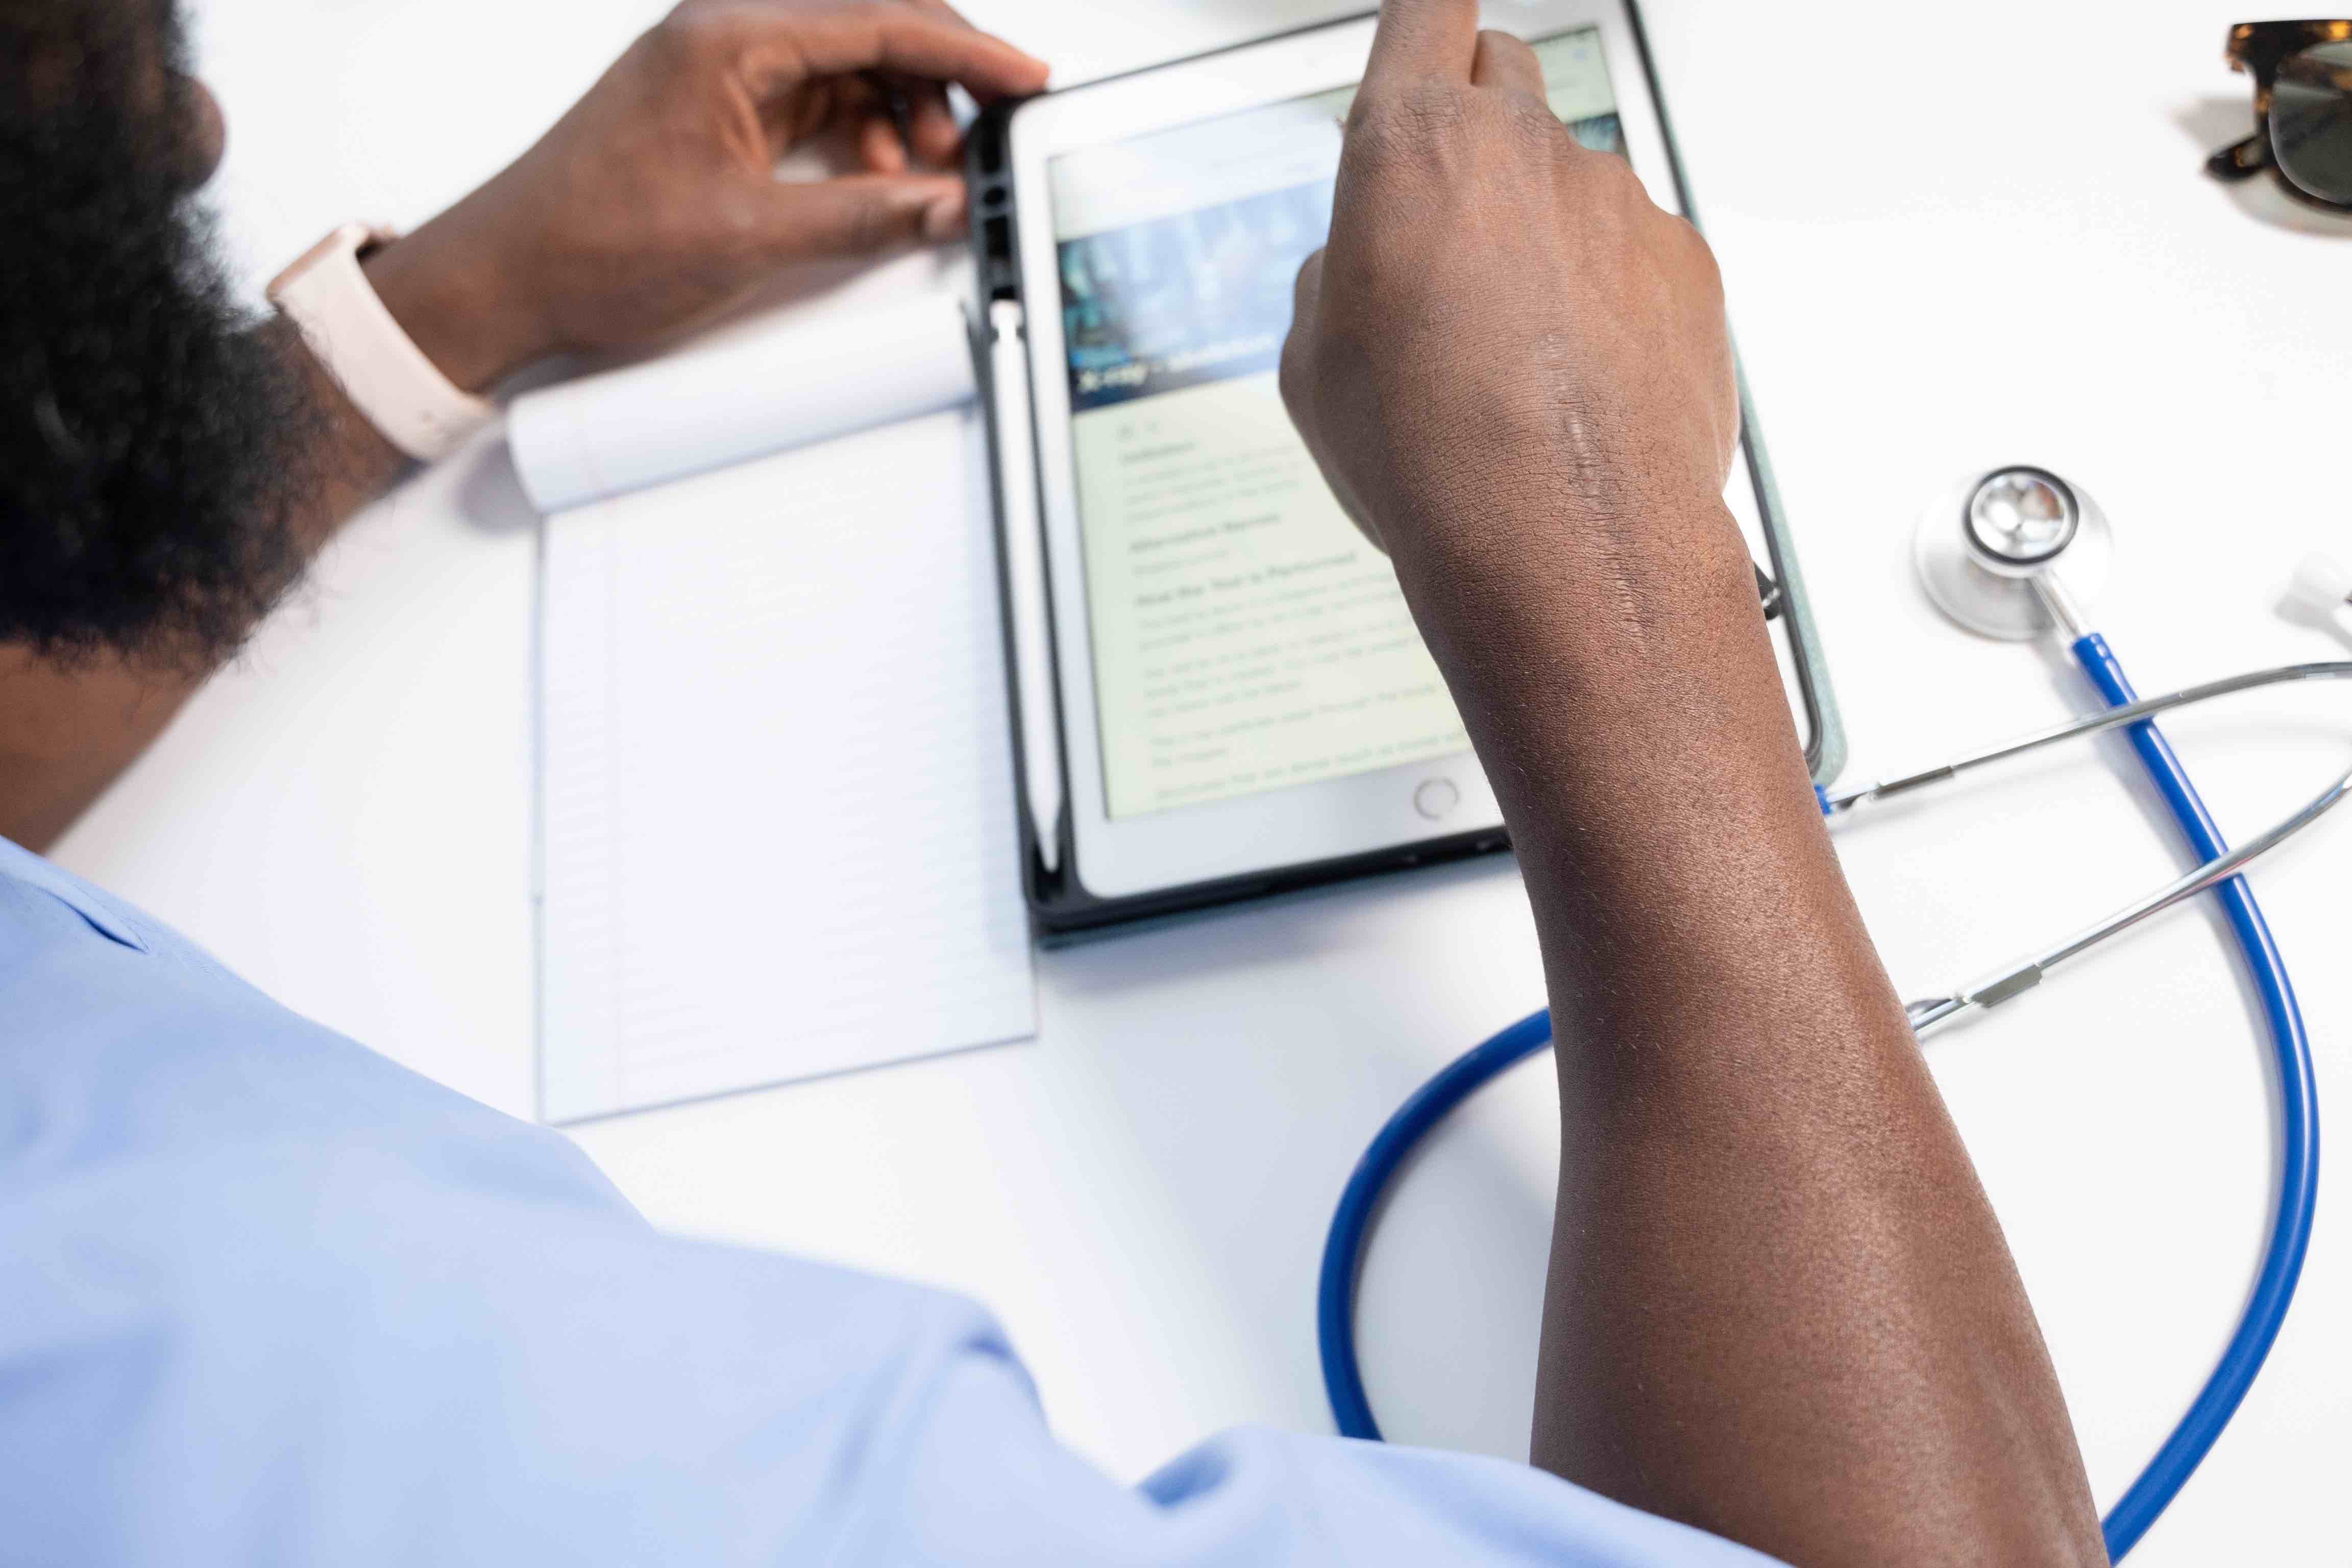 The hands of a medical professional touch a tablet.